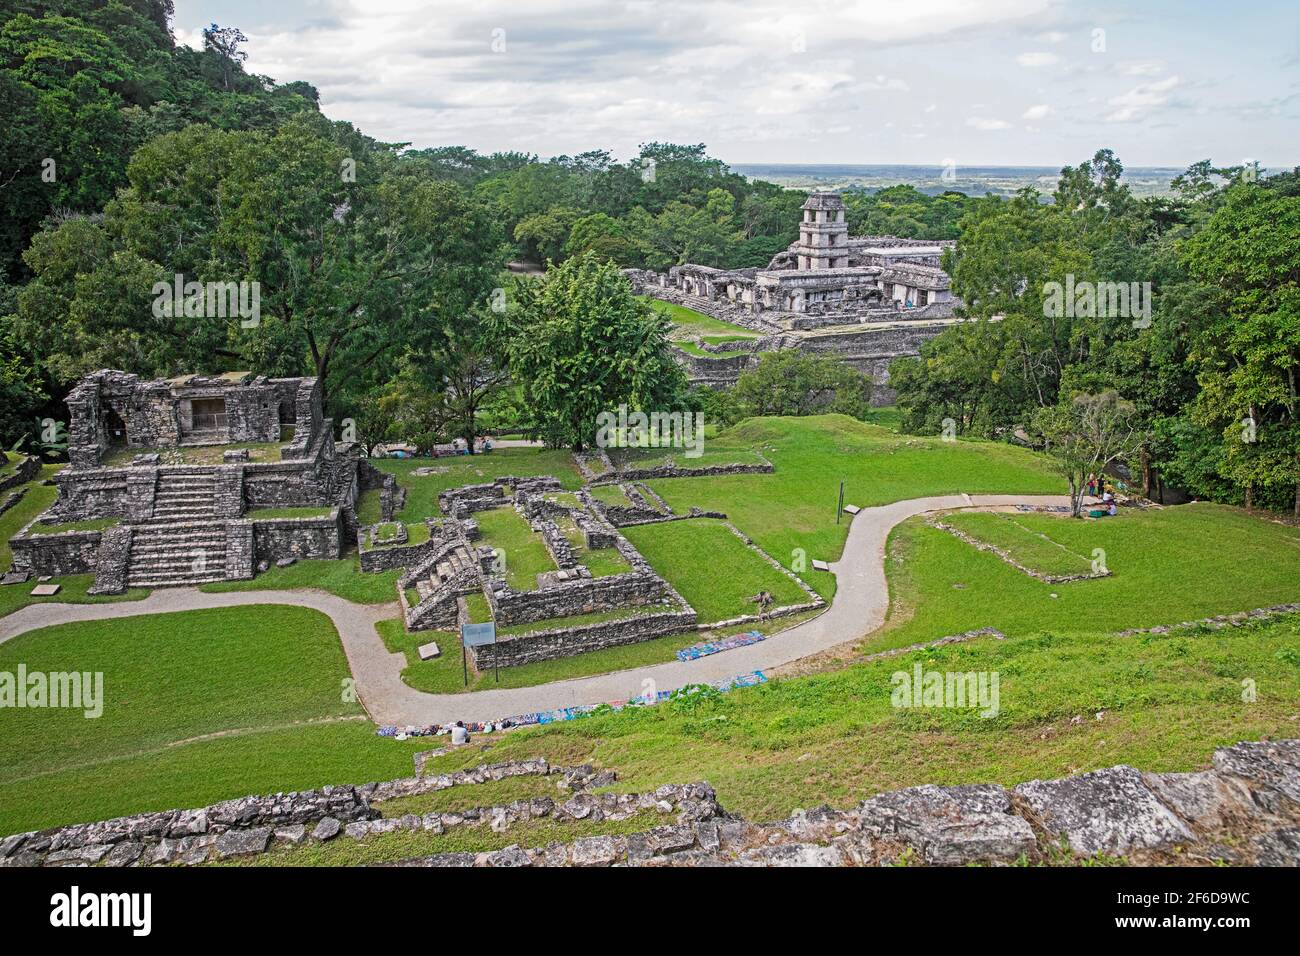 Aerial view over temple ruins and the Palace with Observation Tower at the pre-Columbian Maya civilization site of Palenque, Chiapas, Mexico Stock Photo